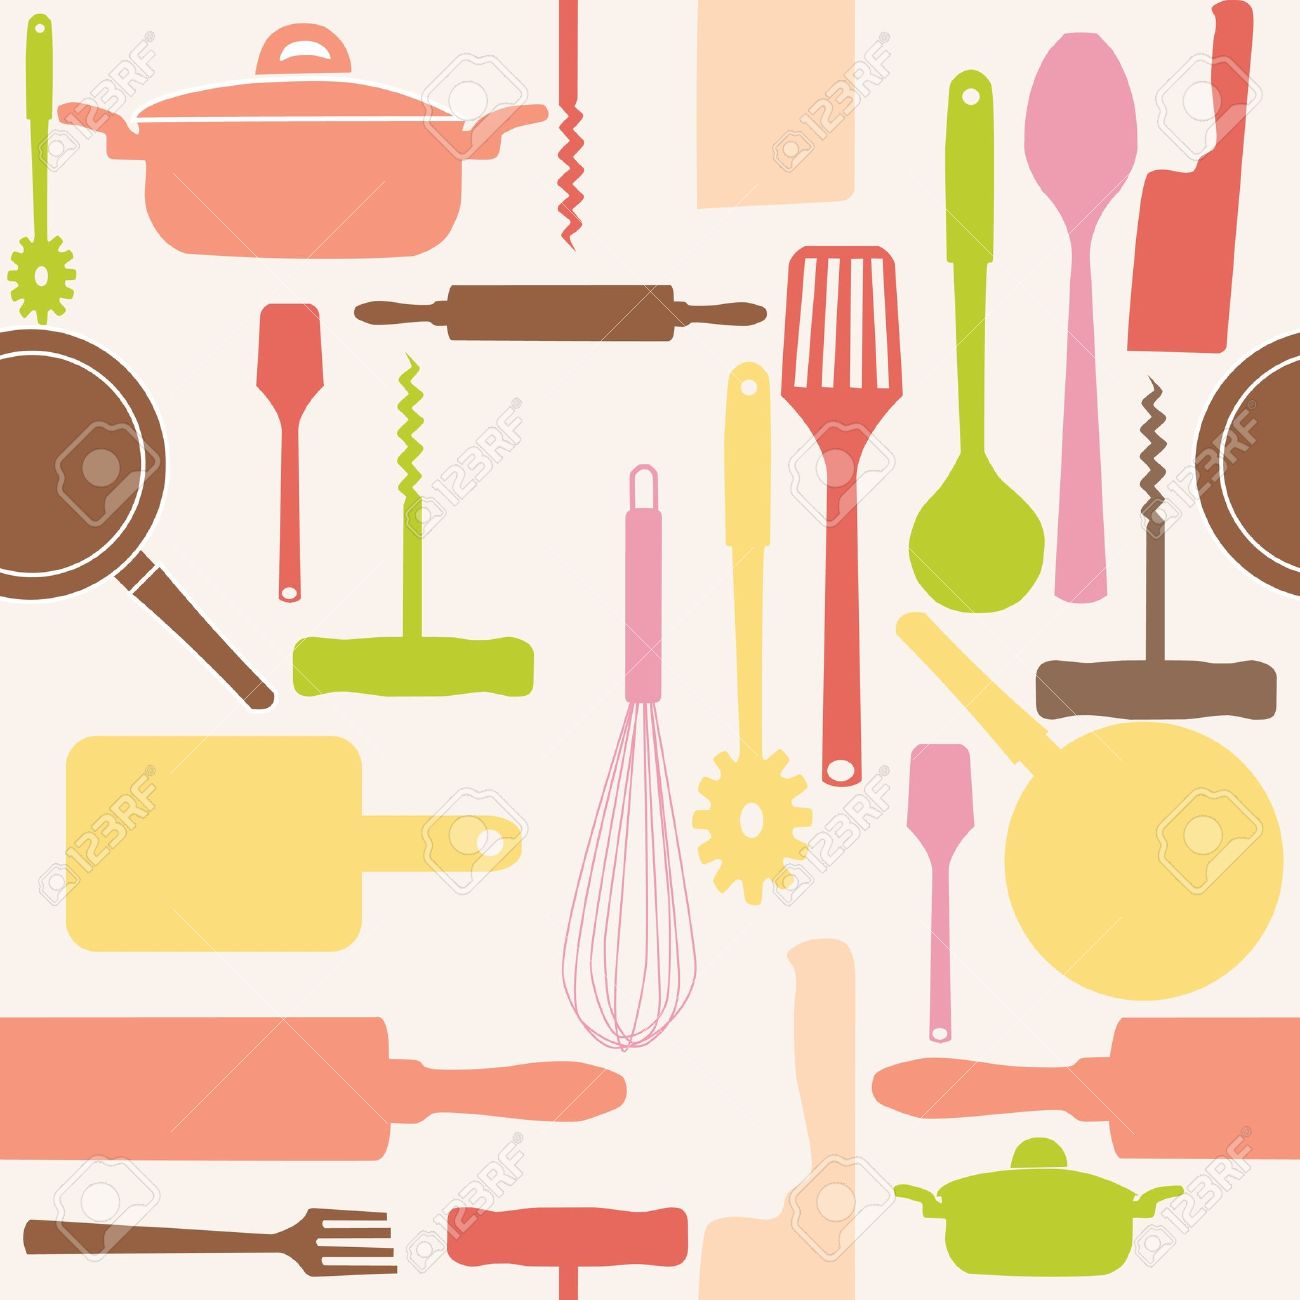 clipart of kitchen items - photo #18